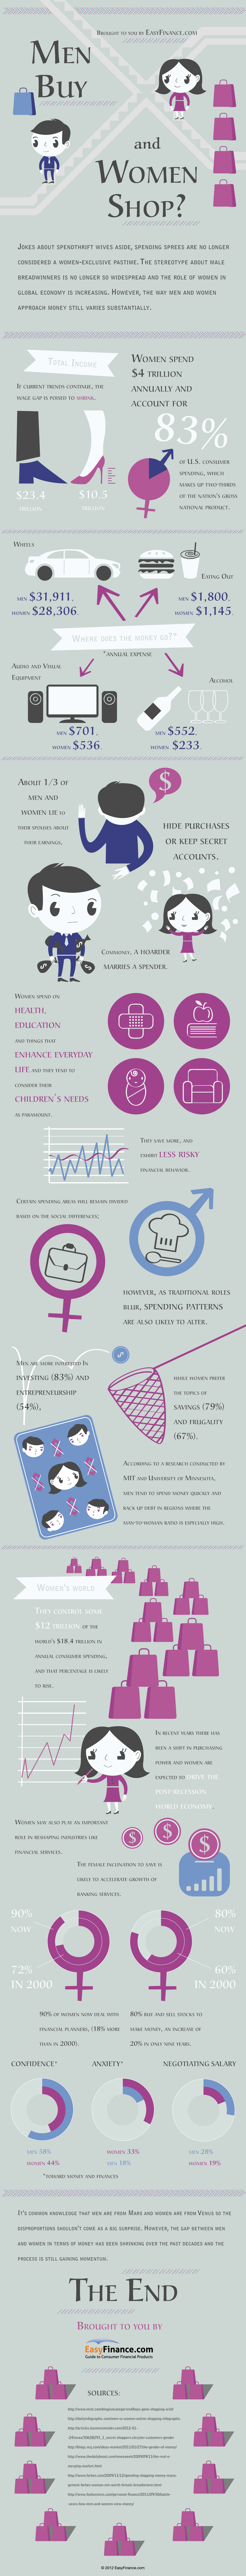 The Battle of the Sexes (Infographic) 